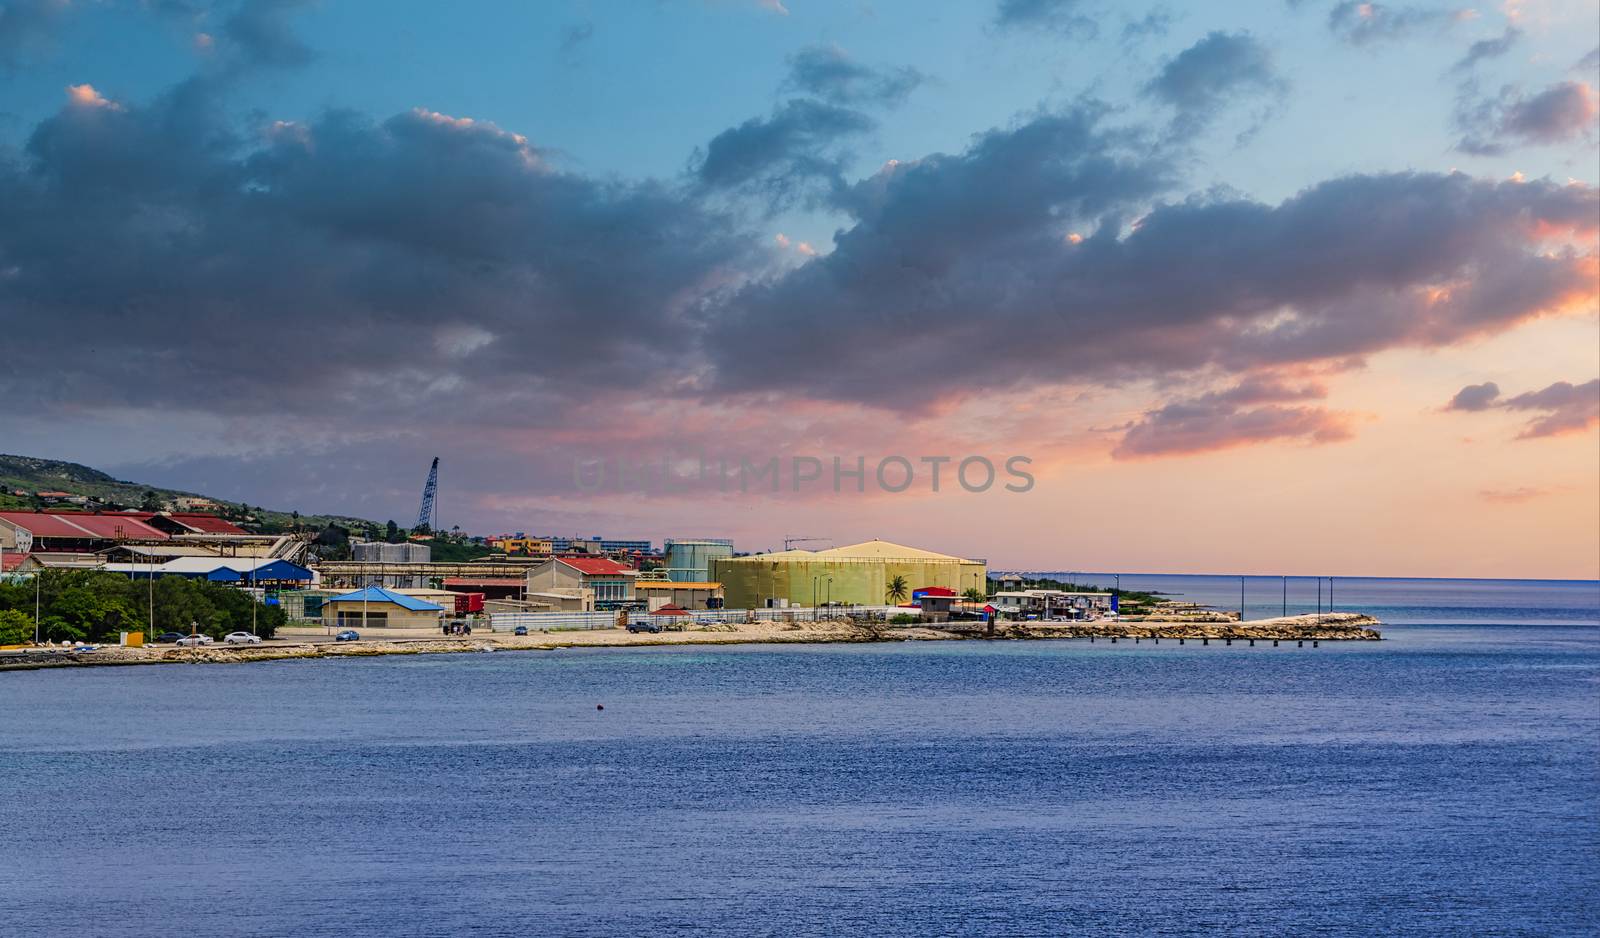 Heavy Industry on Coast of Curacao by Blue Water